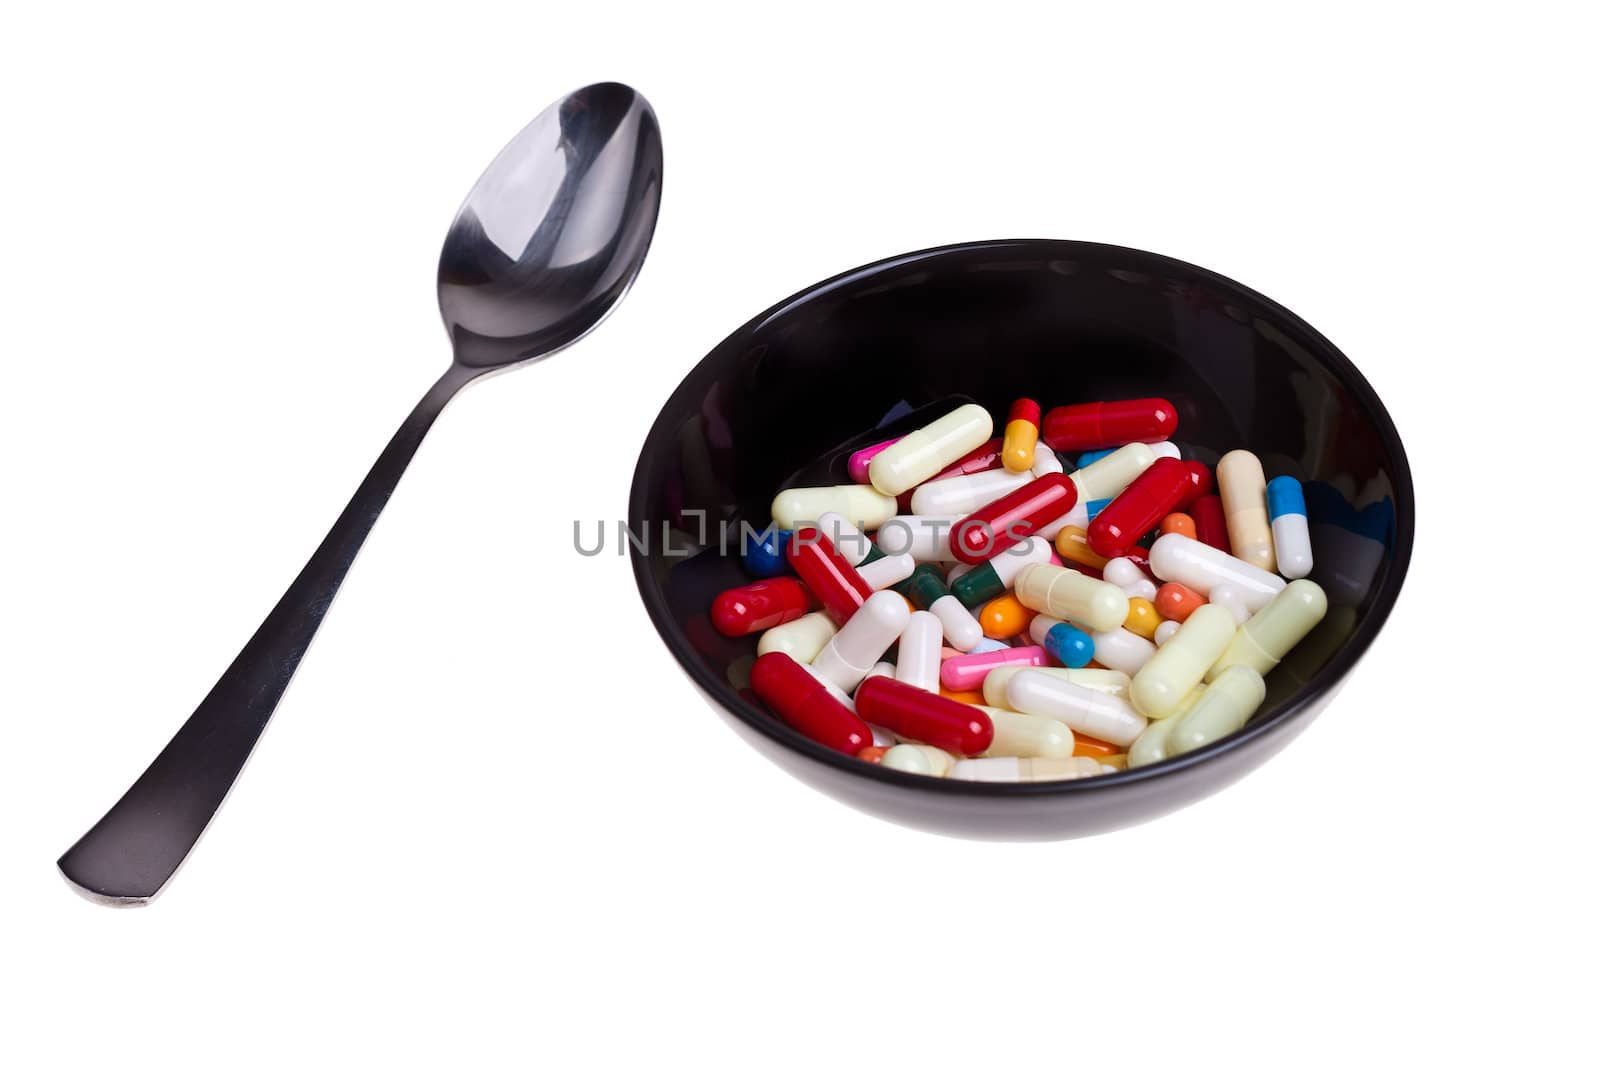 Many colored pills and capsules in a bowl with a spoon